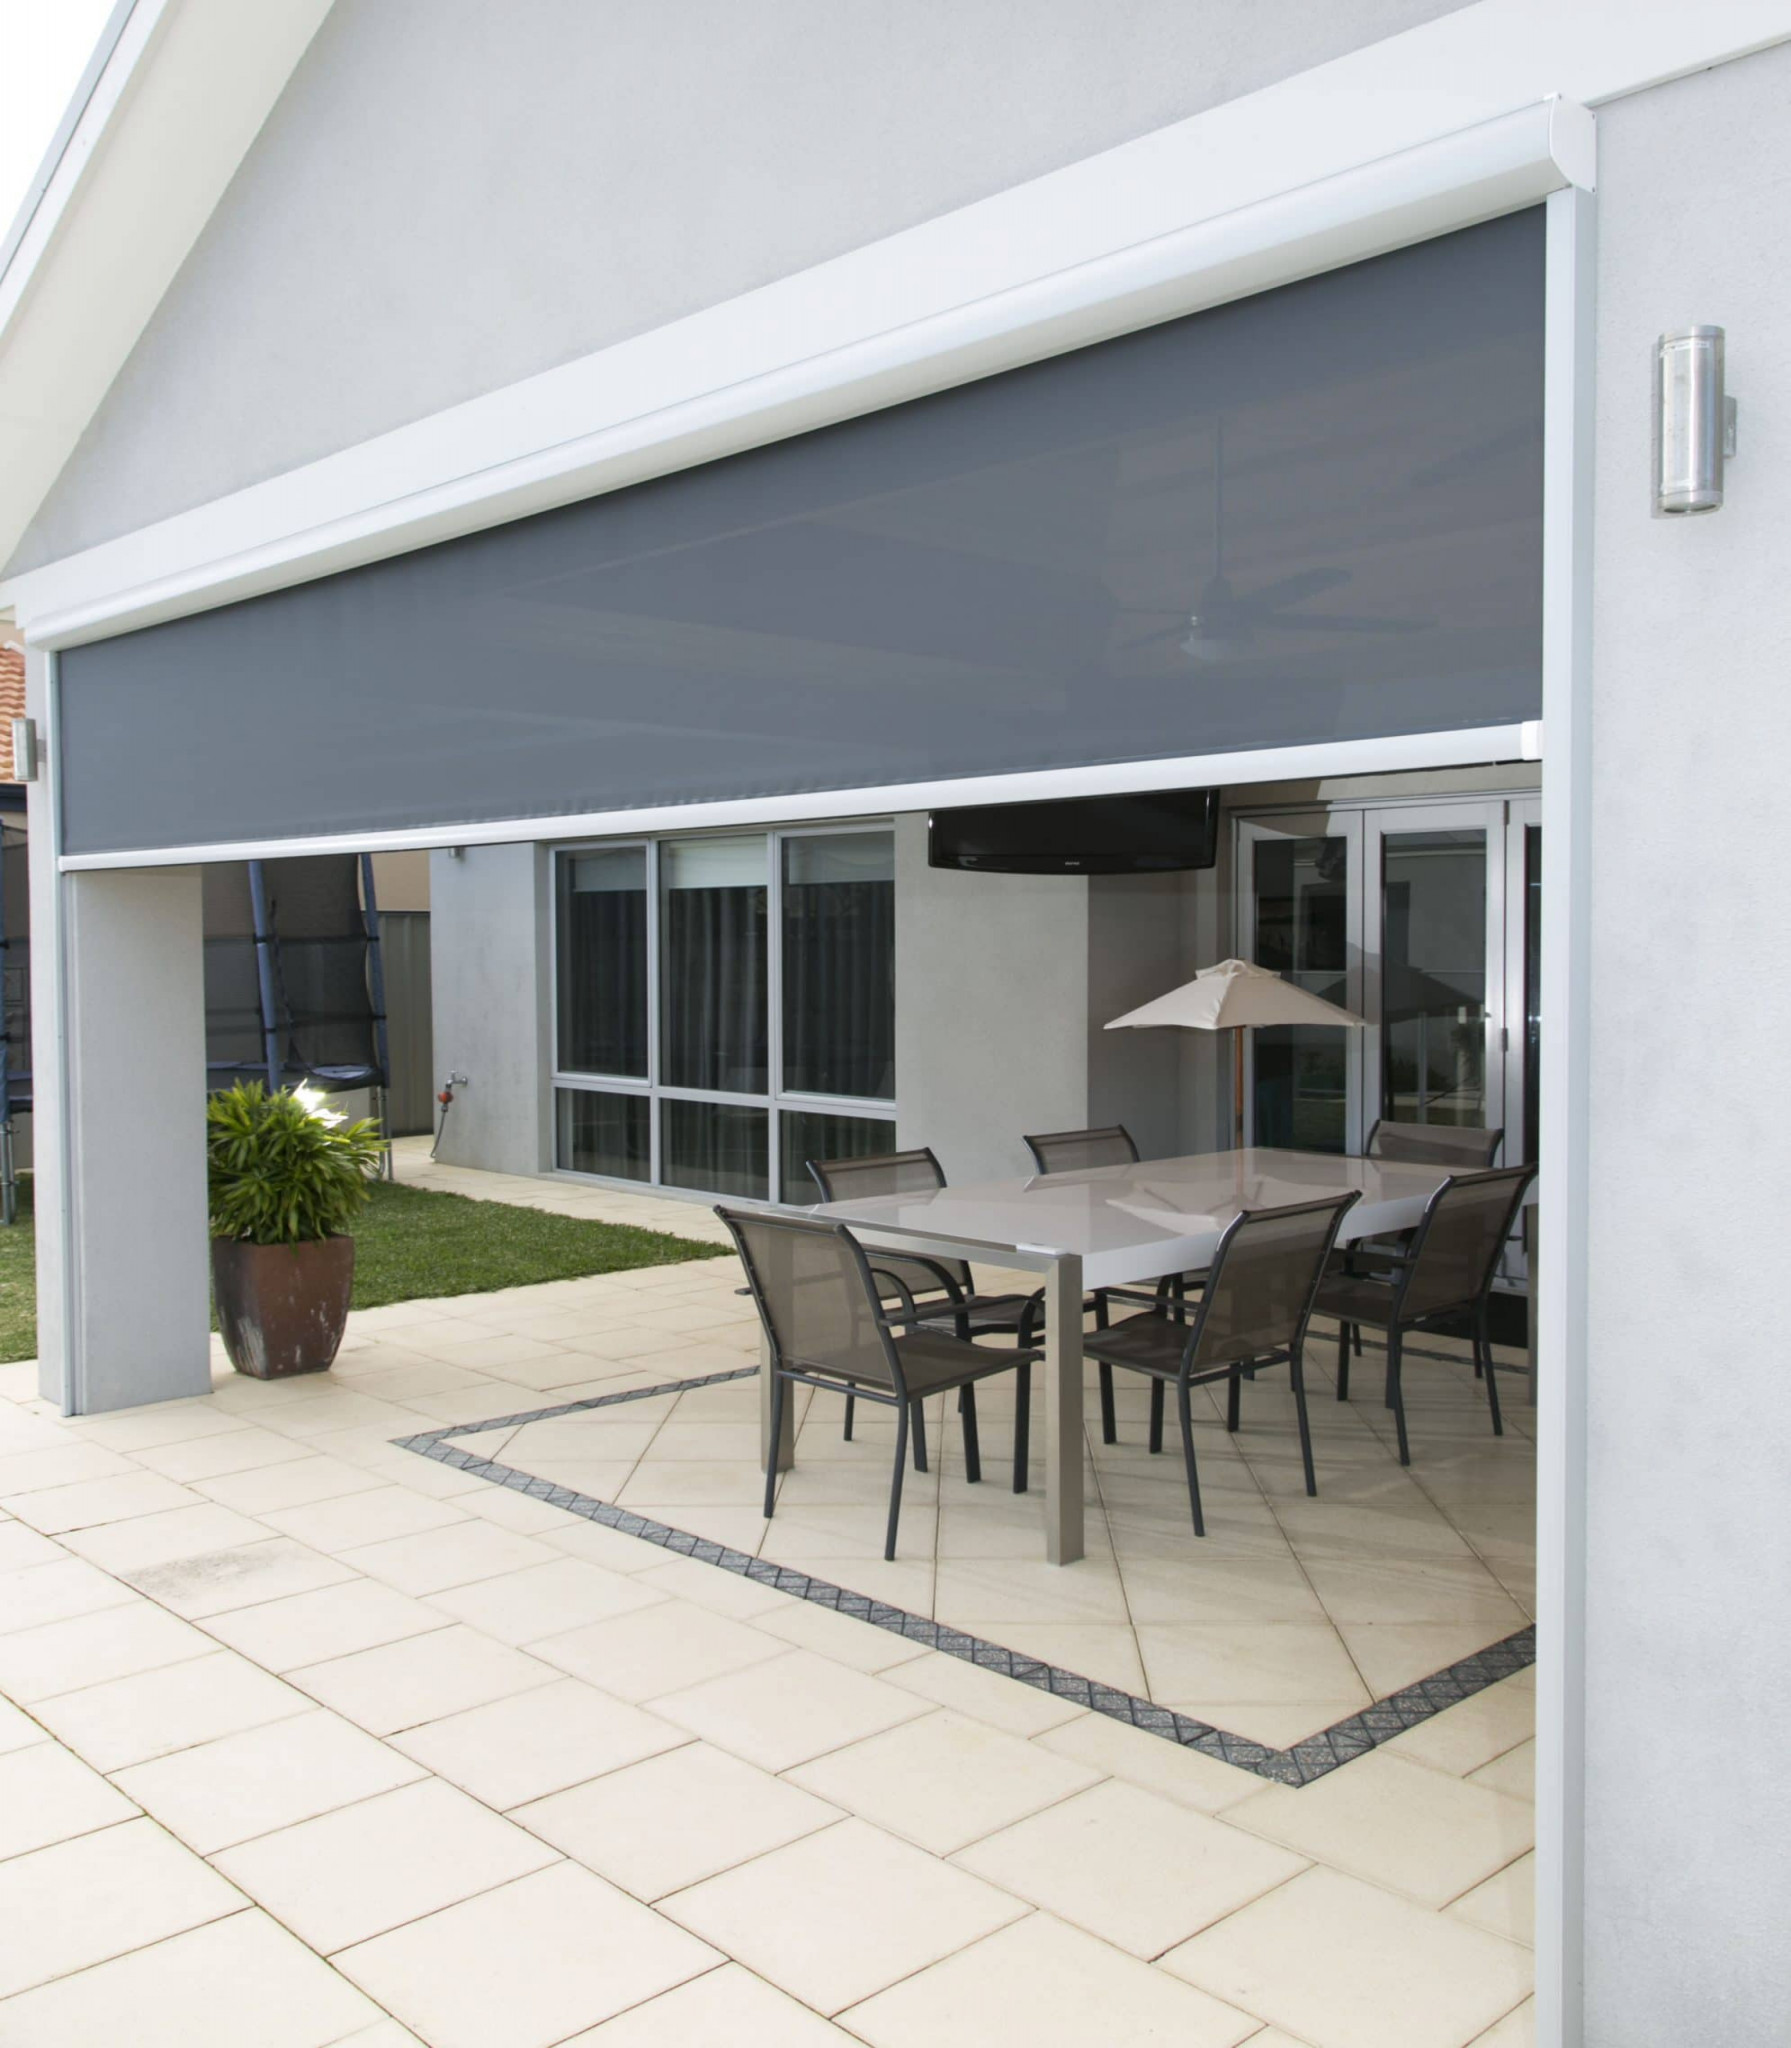 Perth Outdoor Blinds Suppliers  Elegant Outdoor Blinds Perth, WA